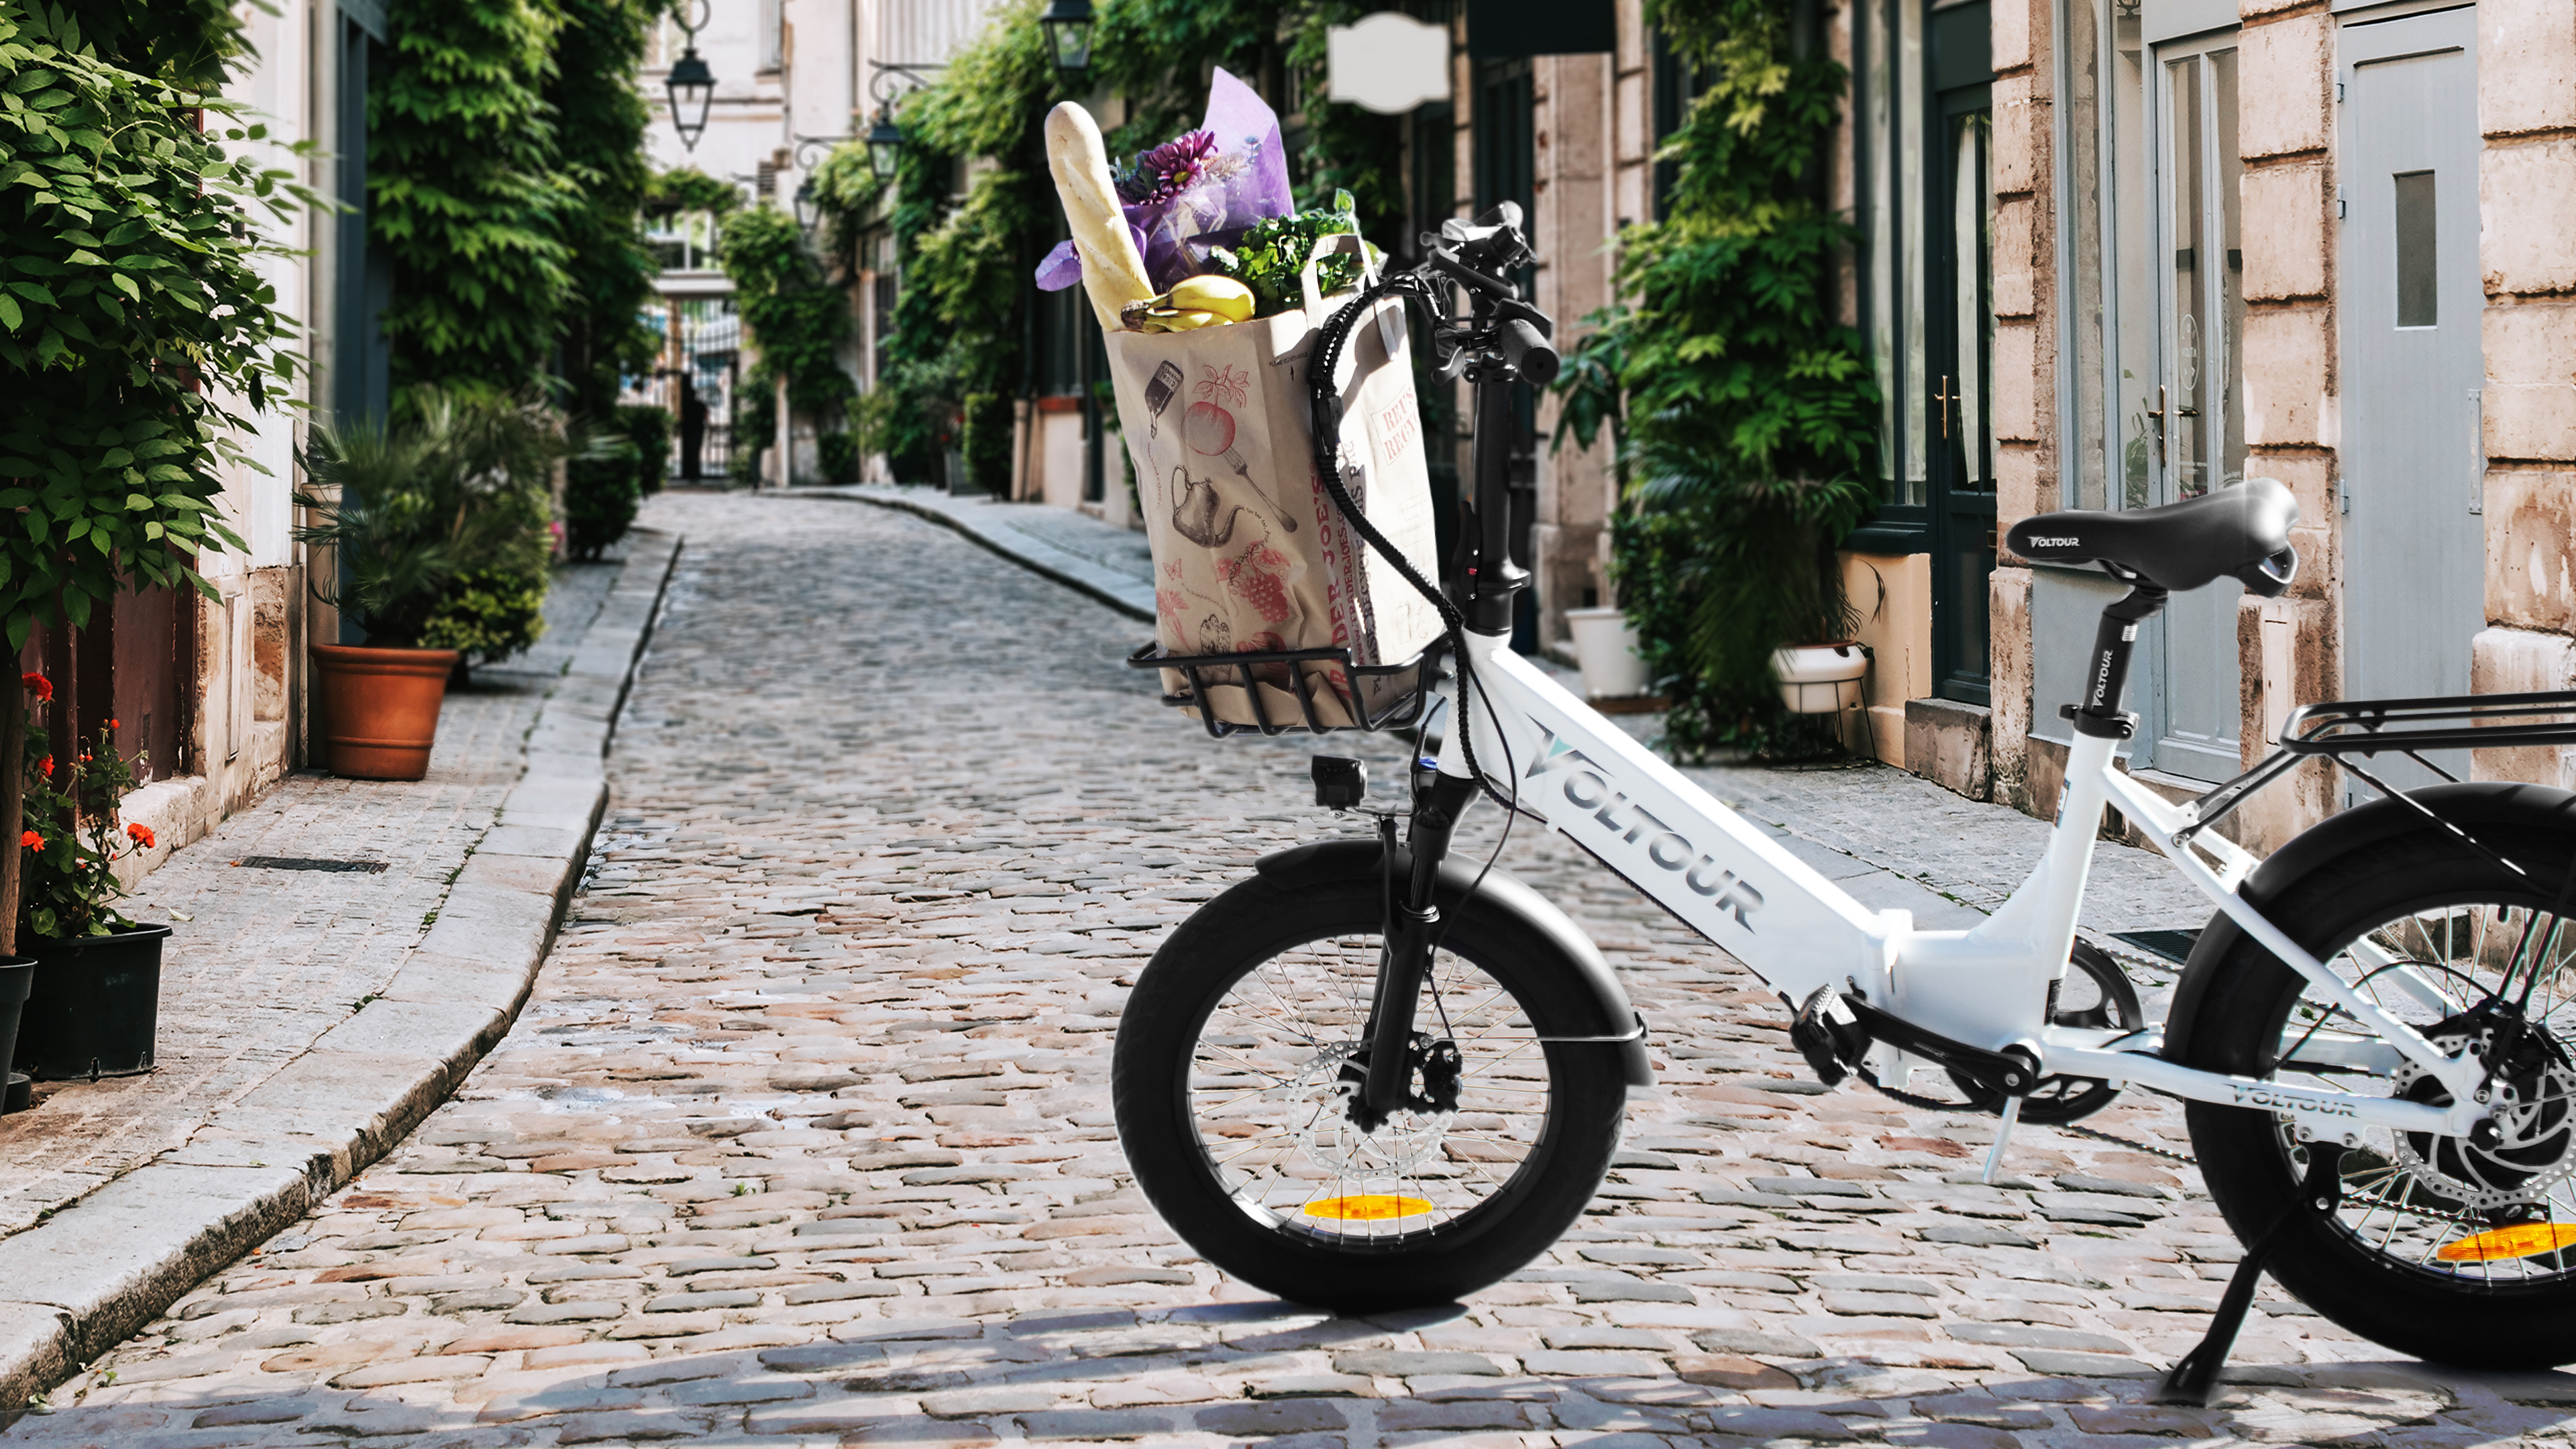 ebike in alley with food in basket